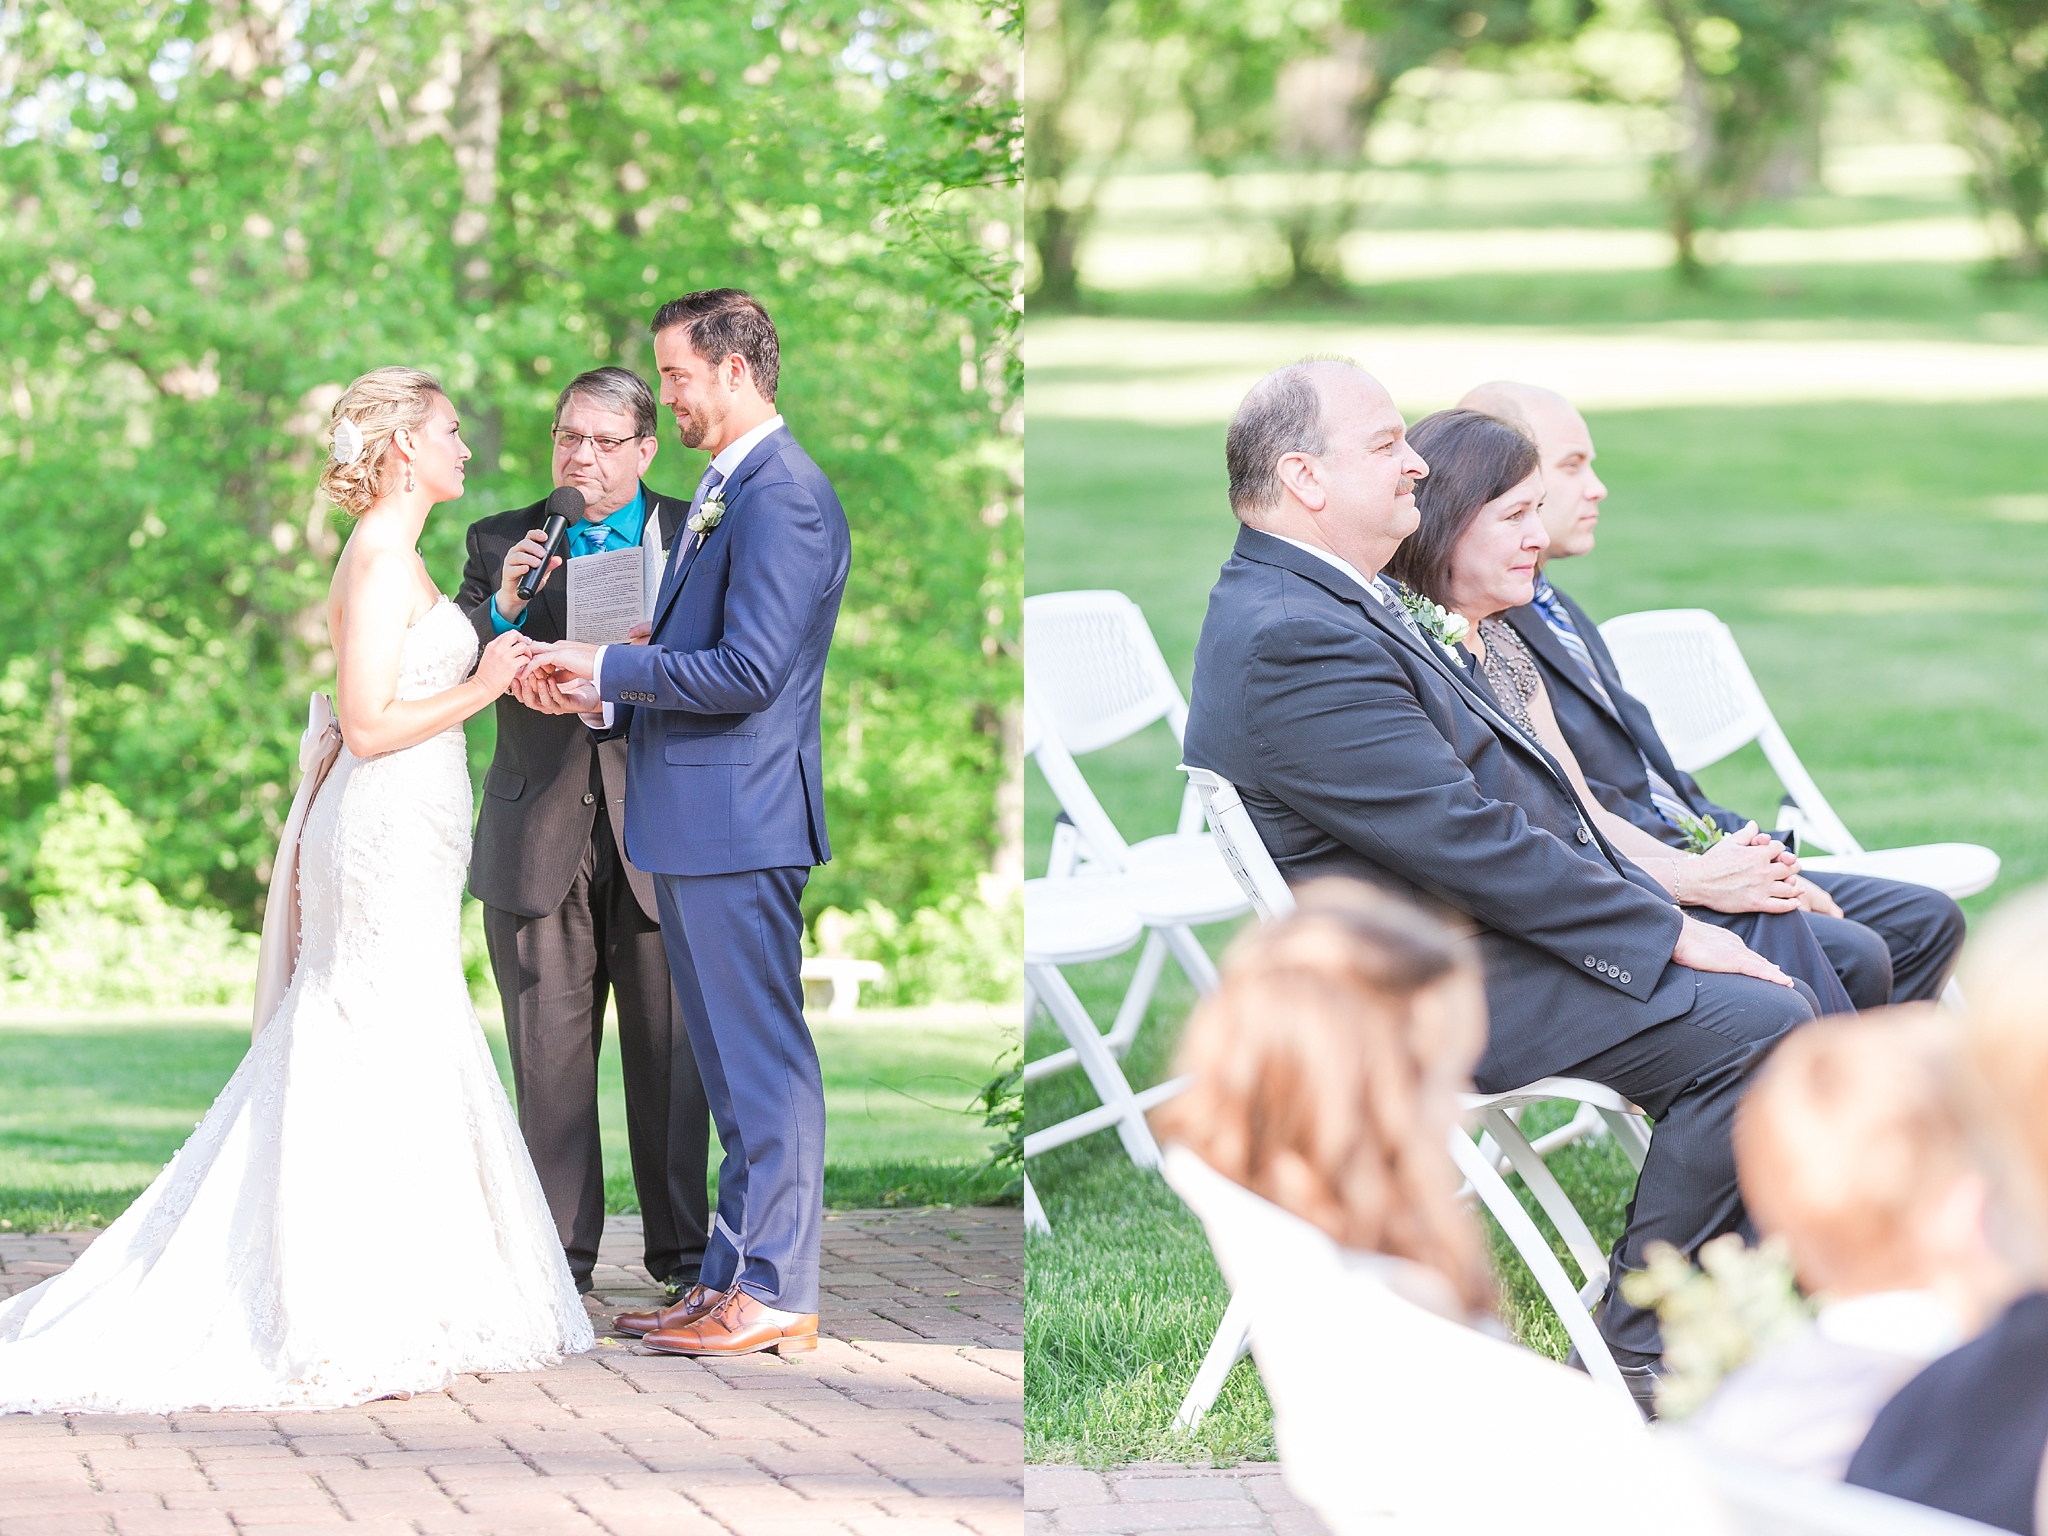 fun-candid-laid-back-wedding-photos-at-wellers-carriage-house-in-saline-michigan-and-at-the-eagle-crest-golf-resort-by-courtney-carolyn-photography_0068.jpg